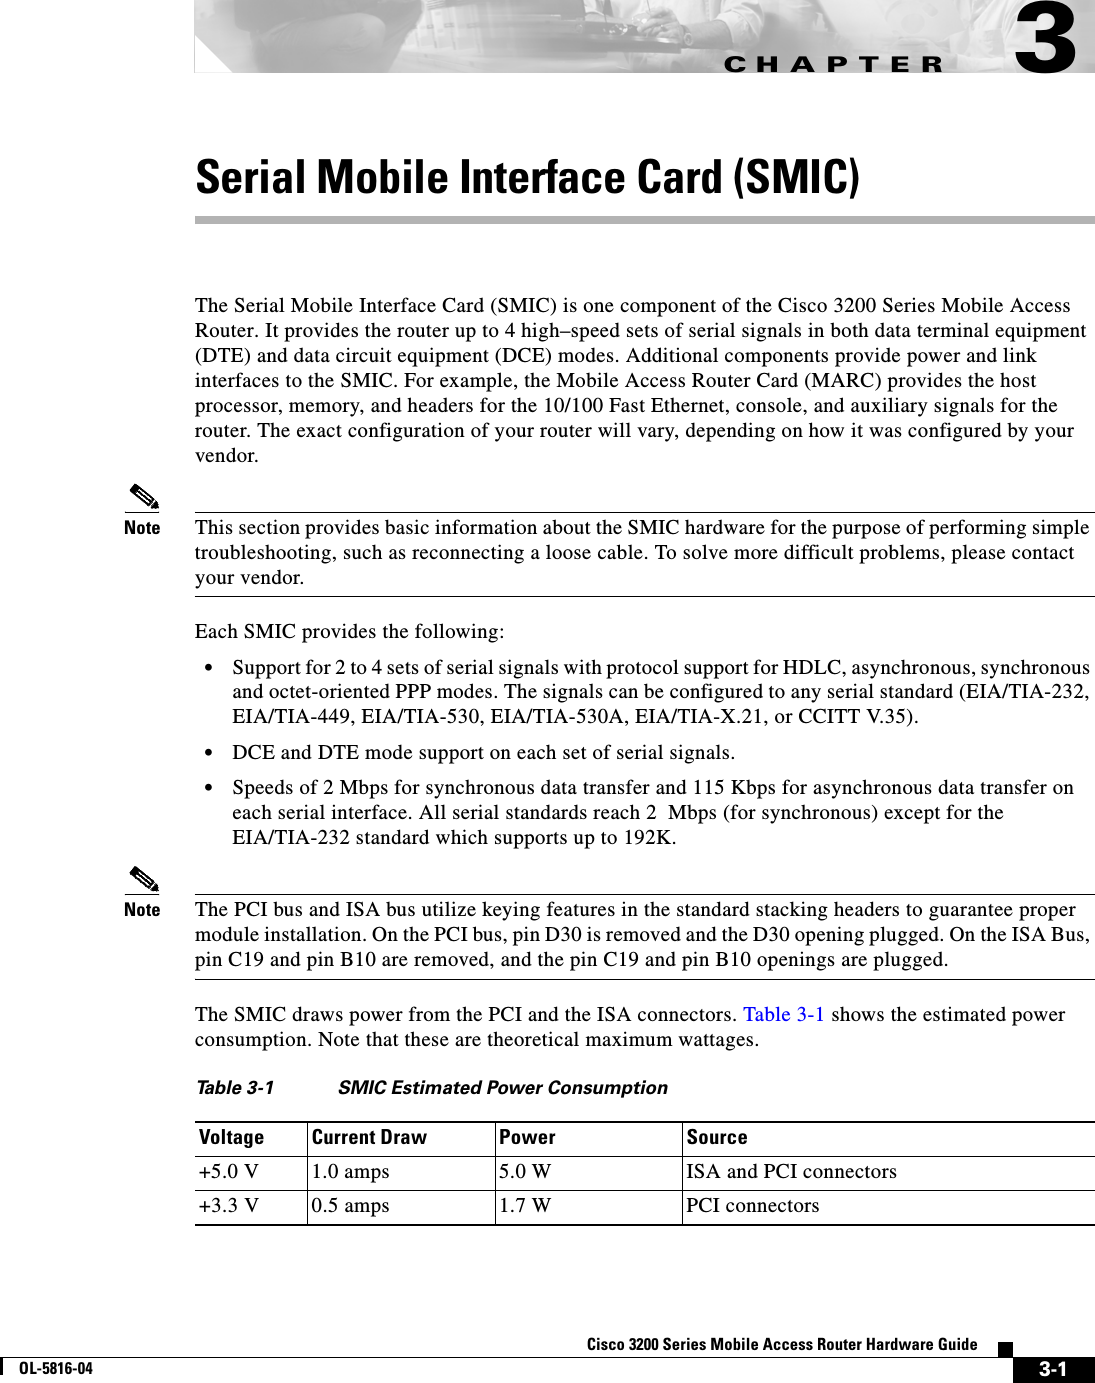 CHAPTER 3-1Cisco 3200 Series Mobile Access Router Hardware GuideOL-5816-043Serial Mobile Interface Card (SMIC)The Serial Mobile Interface Card (SMIC) is one component of the Cisco 3200 Series Mobile Access Router. It provides the router up to 4 high–speed sets of serial signals in both data terminal equipment (DTE) and data circuit equipment (DCE) modes. Additional components provide power and link interfaces to the SMIC. For example, the Mobile Access Router Card (MARC) provides the host processor, memory, and headers for the 10/100 Fast Ethernet, console, and auxiliary signals for the router. The exact configuration of your router will vary, depending on how it was configured by your vendor.Note This section provides basic information about the SMIC hardware for the purpose of performing simple troubleshooting, such as reconnecting a loose cable. To solve more difficult problems, please contact your vendor.Each SMIC provides the following:•Support for 2 to 4 sets of serial signals with protocol support for HDLC, asynchronous, synchronous and octet-oriented PPP modes. The signals can be configured to any serial standard (EIA/TIA-232, EIA/TIA-449, EIA/TIA-530, EIA/TIA-530A, EIA/TIA-X.21, or CCITT V.35).•DCE and DTE mode support on each set of serial signals.•Speeds of 2 Mbps for synchronous data transfer and 115 Kbps for asynchronous data transfer on each serial interface. All serial standards reach 2  Mbps (for synchronous) except for the EIA/TIA-232 standard which supports up to 192K.Note The PCI bus and ISA bus utilize keying features in the standard stacking headers to guarantee proper module installation. On the PCI bus, pin D30 is removed and the D30 opening plugged. On the ISA Bus, pin C19 and pin B10 are removed, and the pin C19 and pin B10 openings are plugged. The SMIC draws power from the PCI and the ISA connectors. Table 3-1 shows the estimated power consumption. Note that these are theoretical maximum wattages.Table 3-1 SMIC Estimated Power ConsumptionVoltage Current Draw Power Source+5.0 V 1.0 amps 5.0 W ISA and PCI connectors+3.3 V 0.5 amps 1.7 W PCI connectors